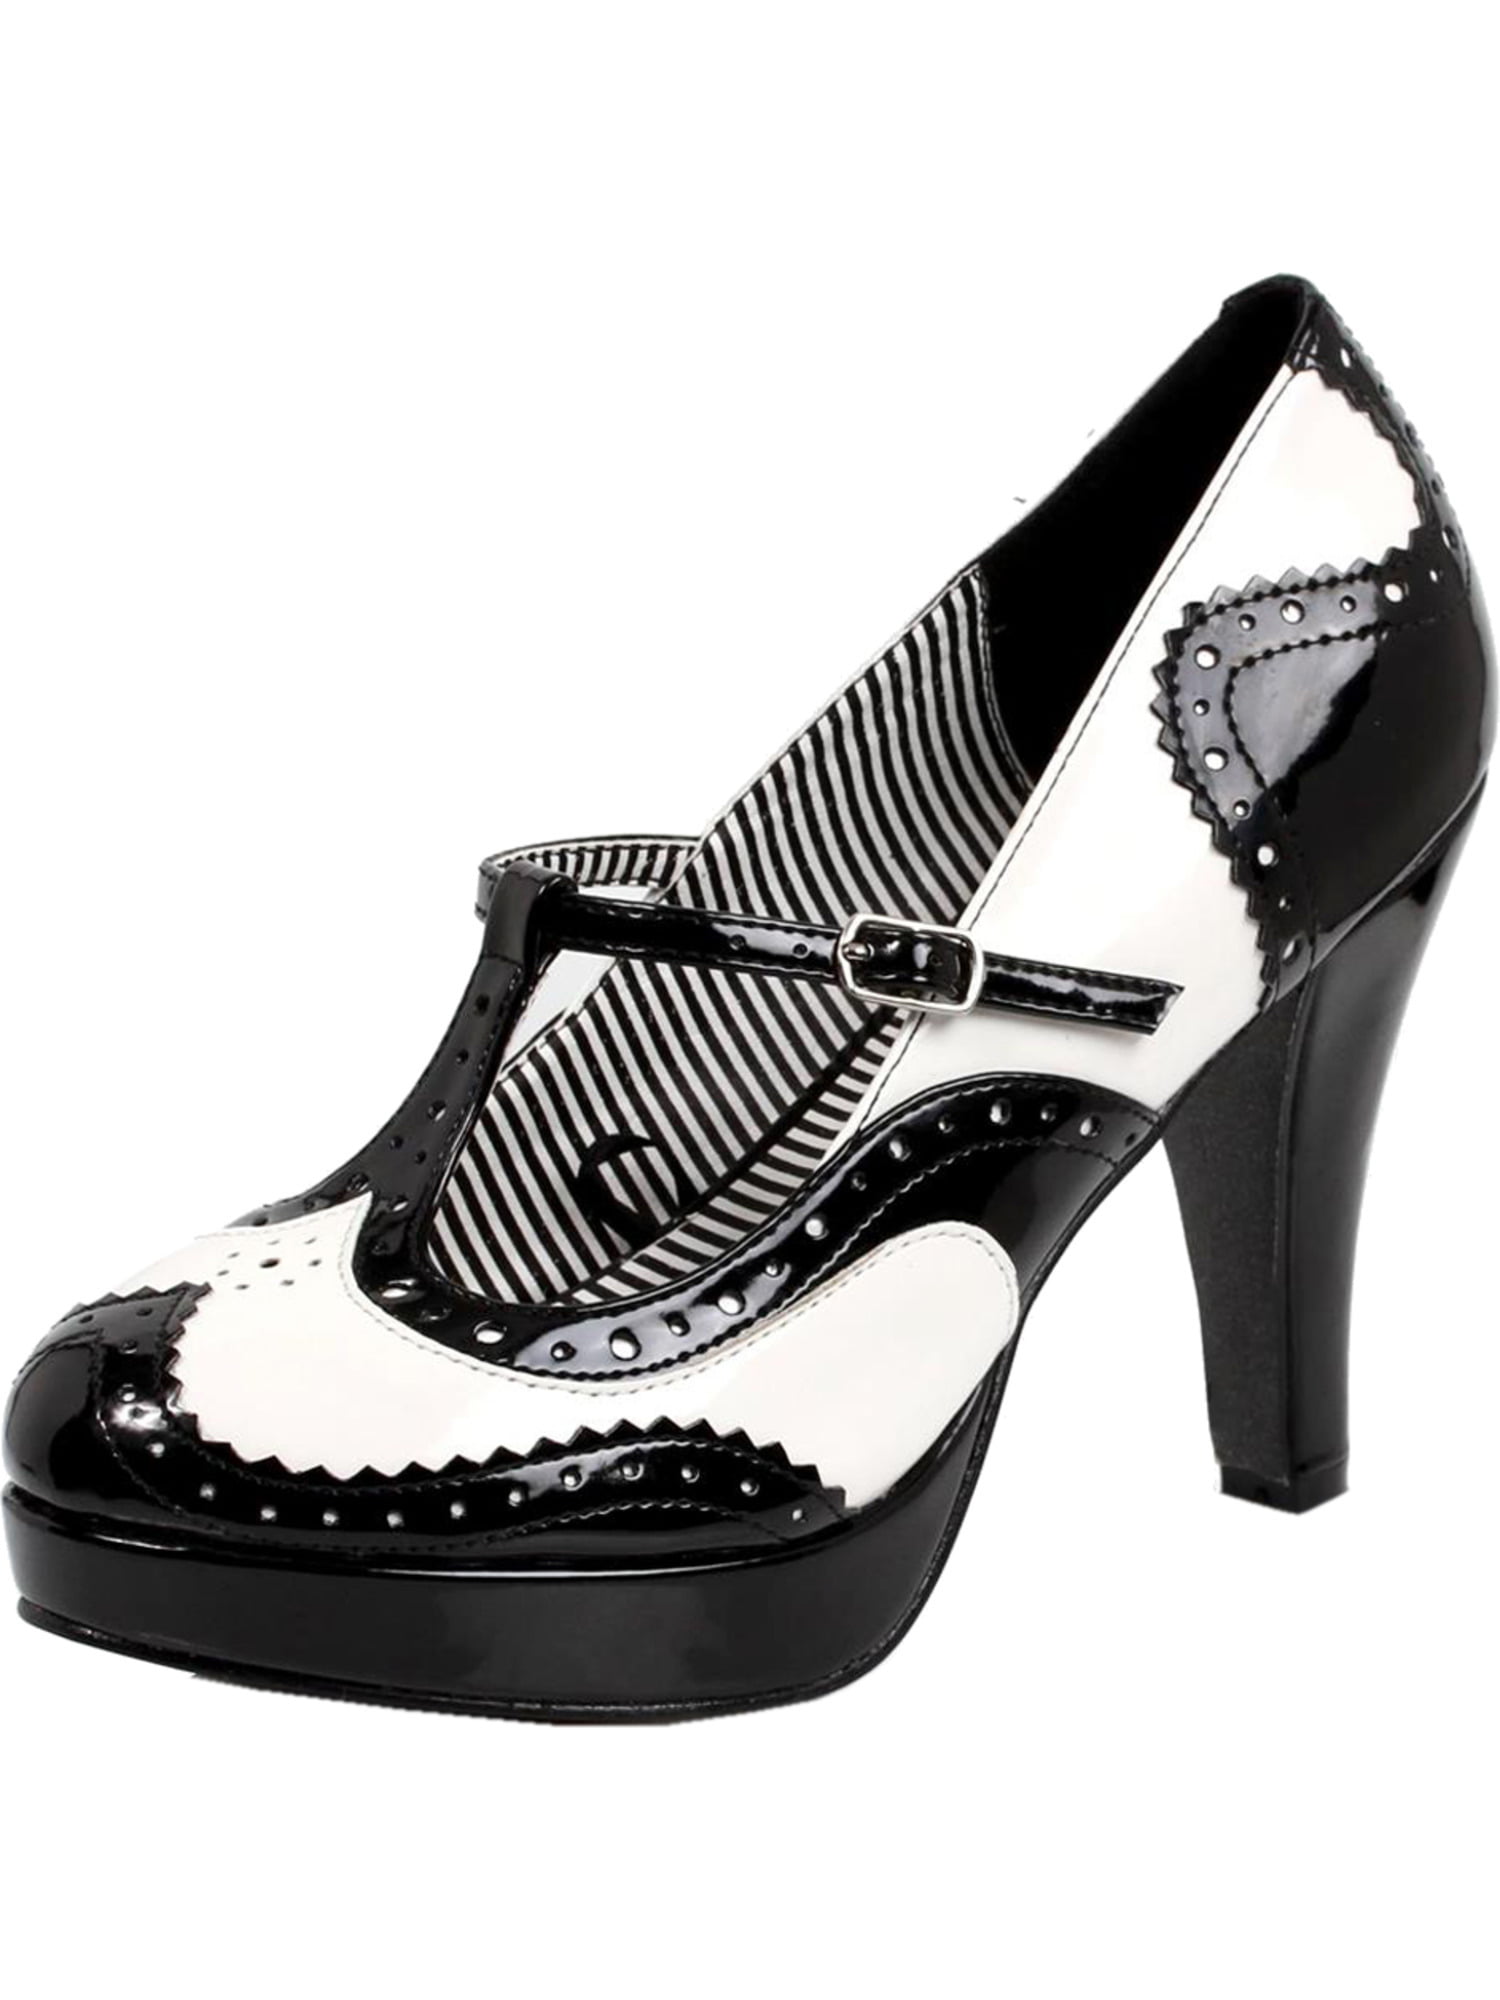 T Strap Mary Jane Pumps Wingtip Shoes 